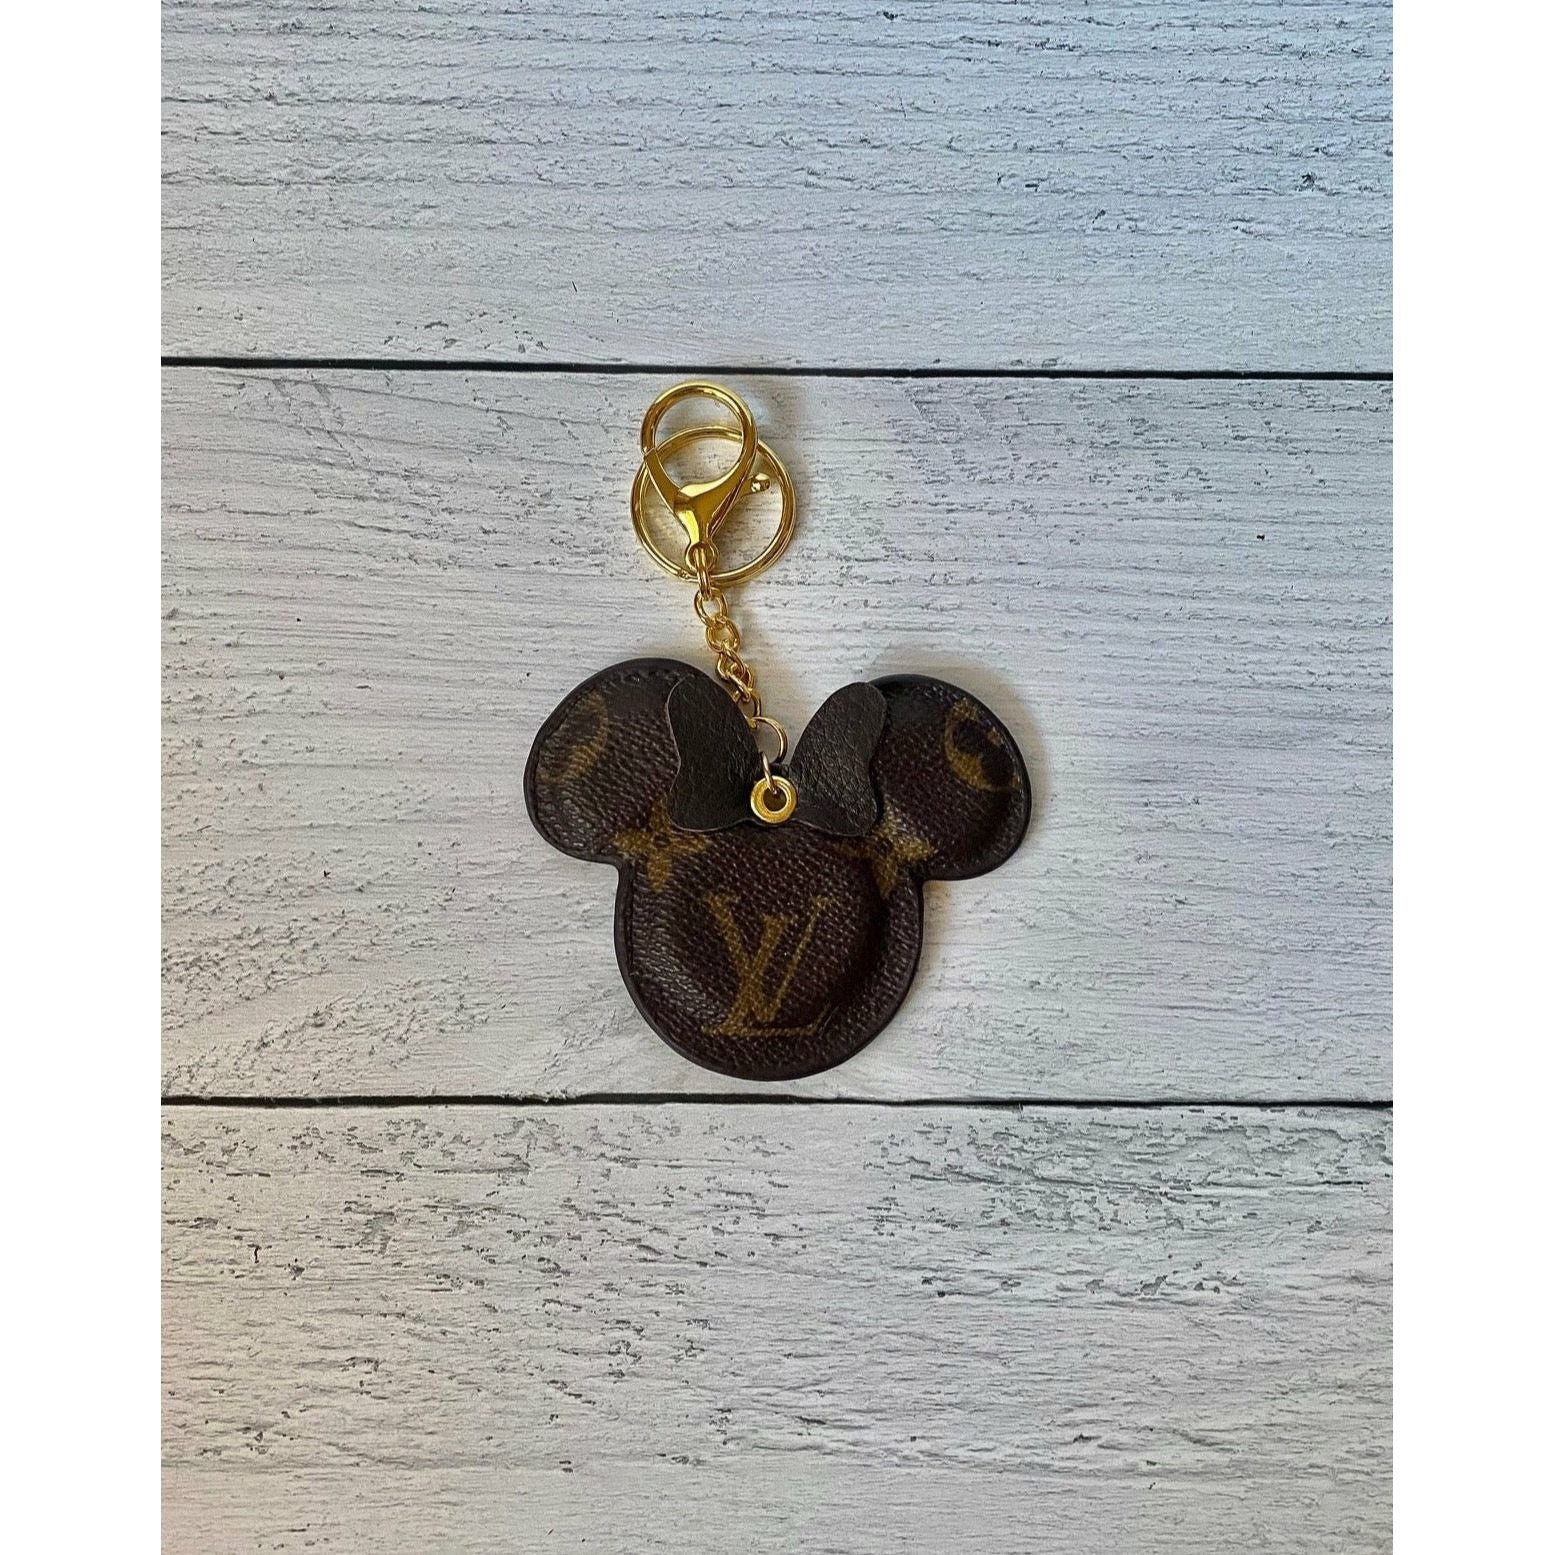 Upcycled Louis Vuitton Minnie Mouse Bag Charm in Pink